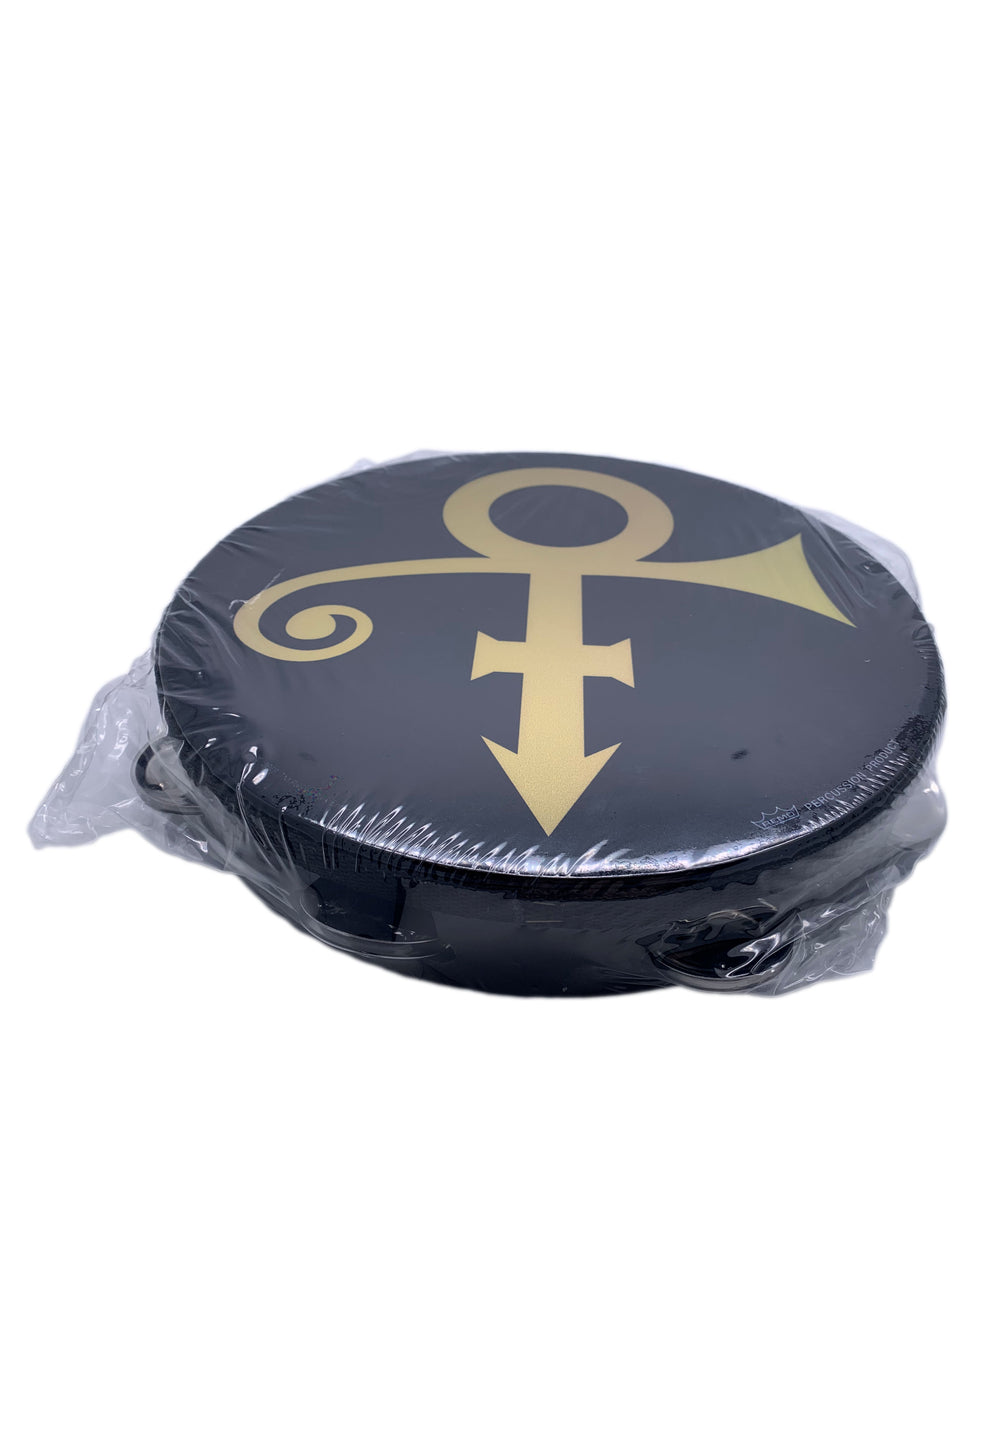 Prince Official Paisley Park Black Gold LOVE SYMBOL Tambourine Brand New Sealed